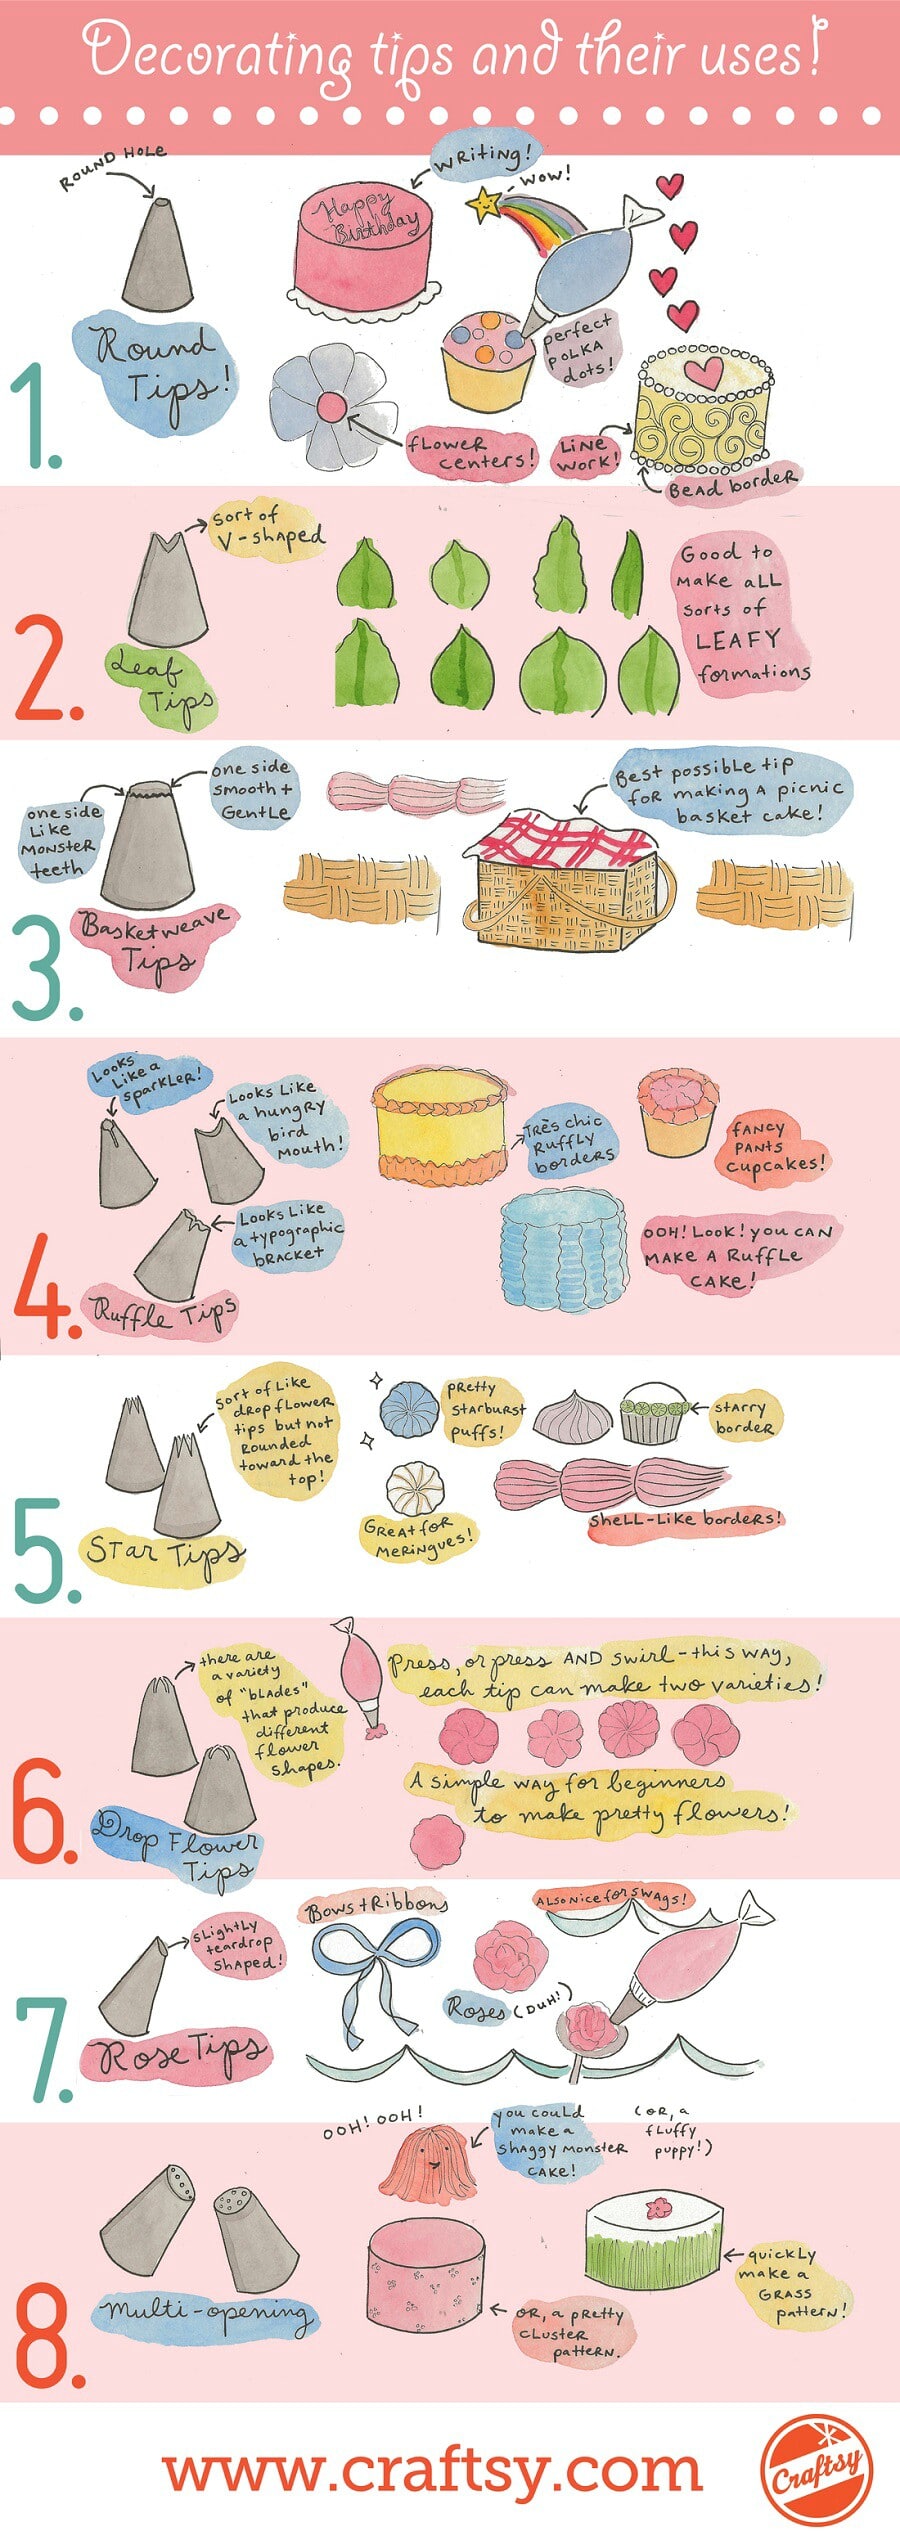 6. Figure out which decorating tips to use on your cakes.